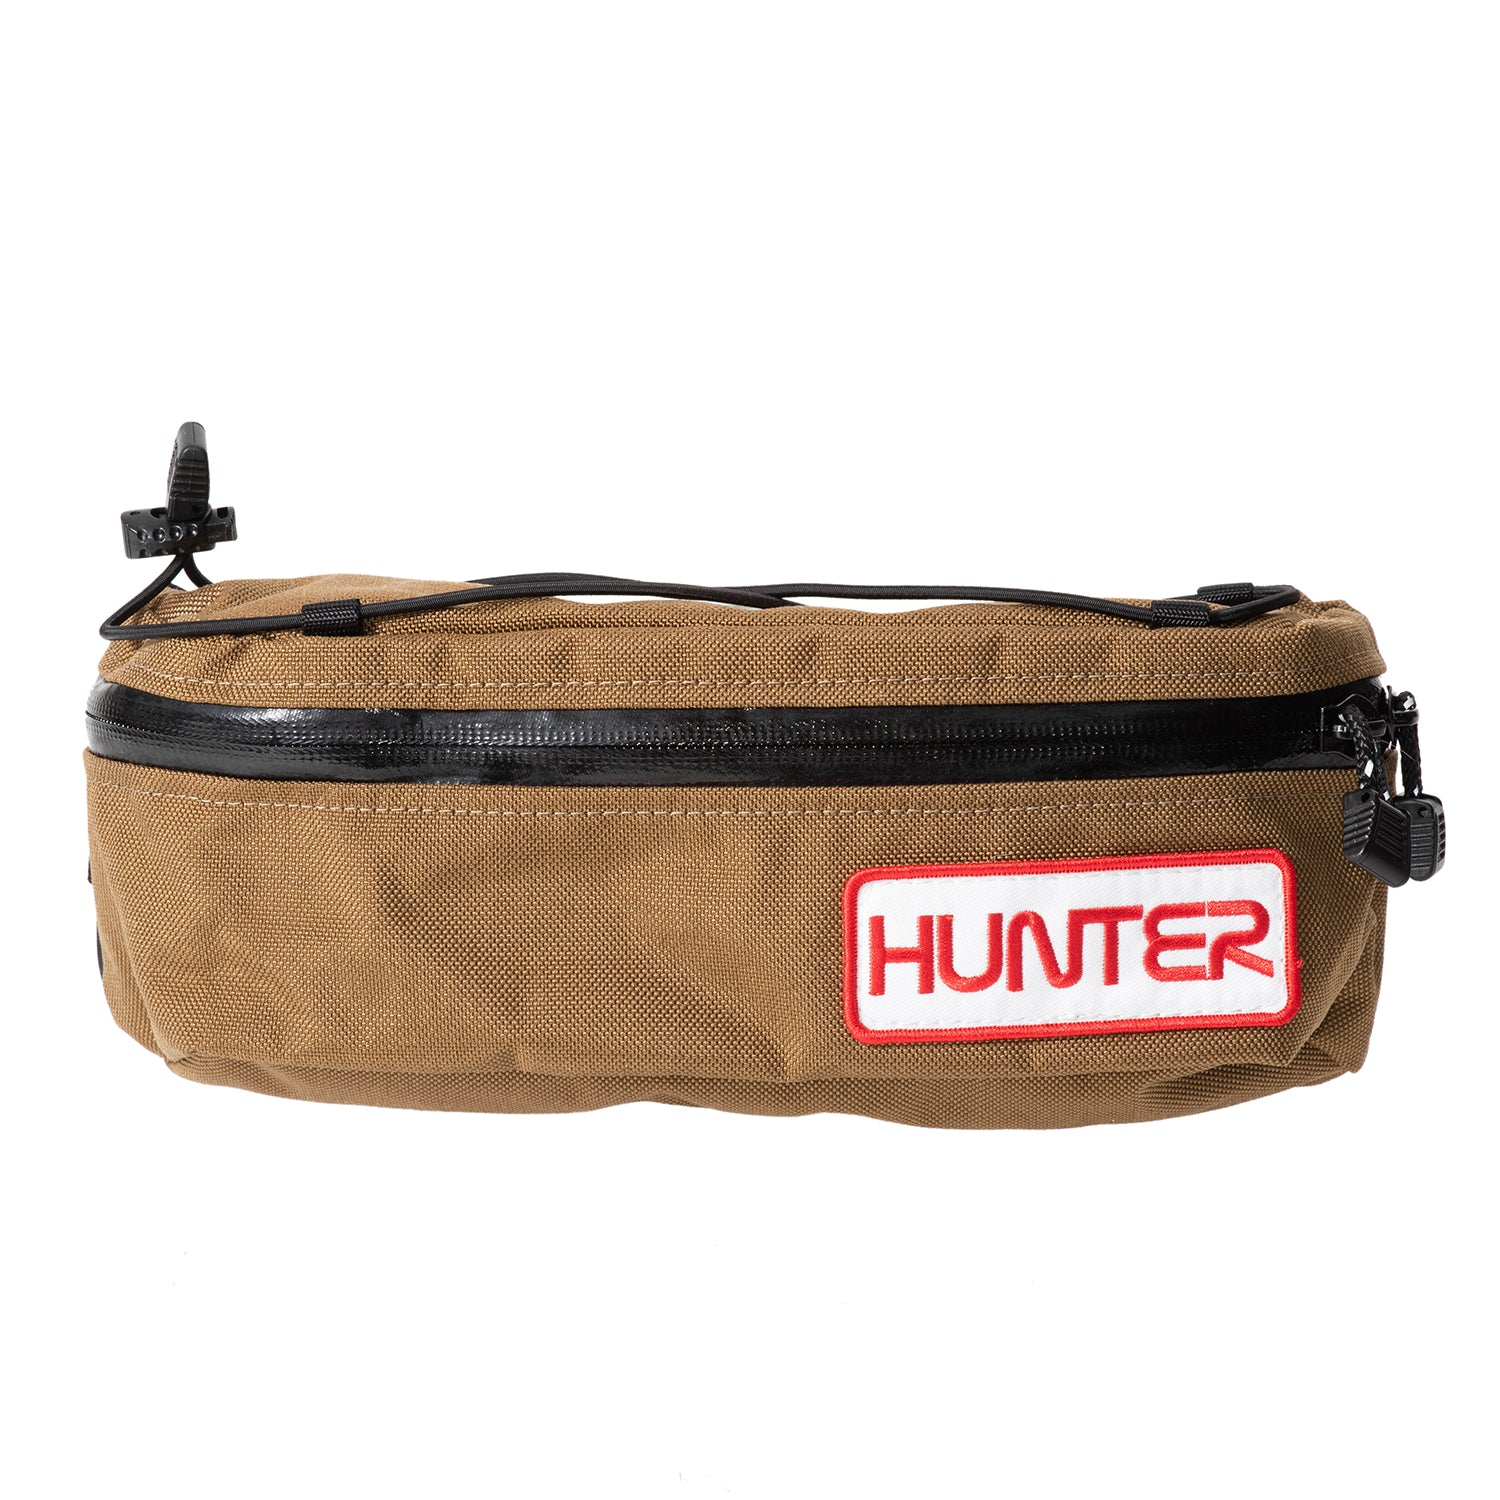 HUNTER CYCLES Shred Packs With Bungee Top